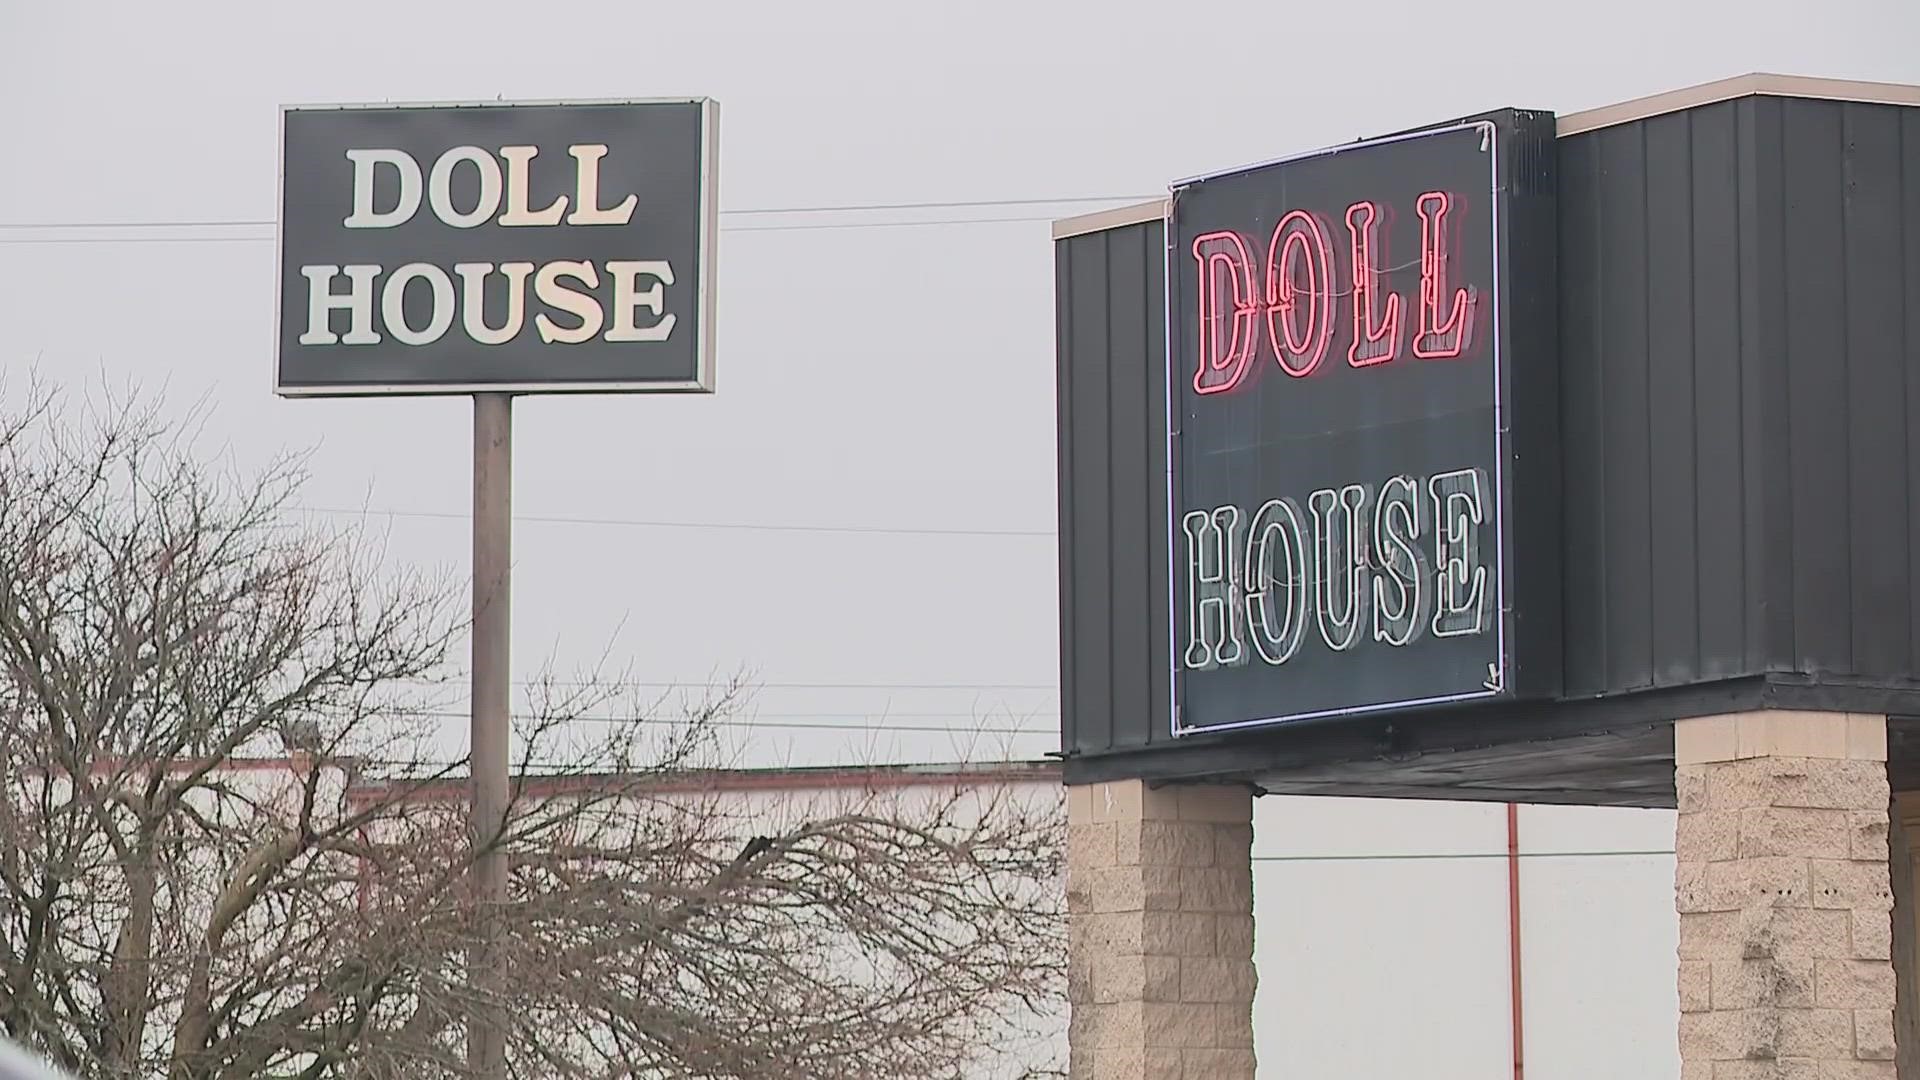 The City of Columbus voted to revoke the liquor license at the Doll House strip club due to crimes.